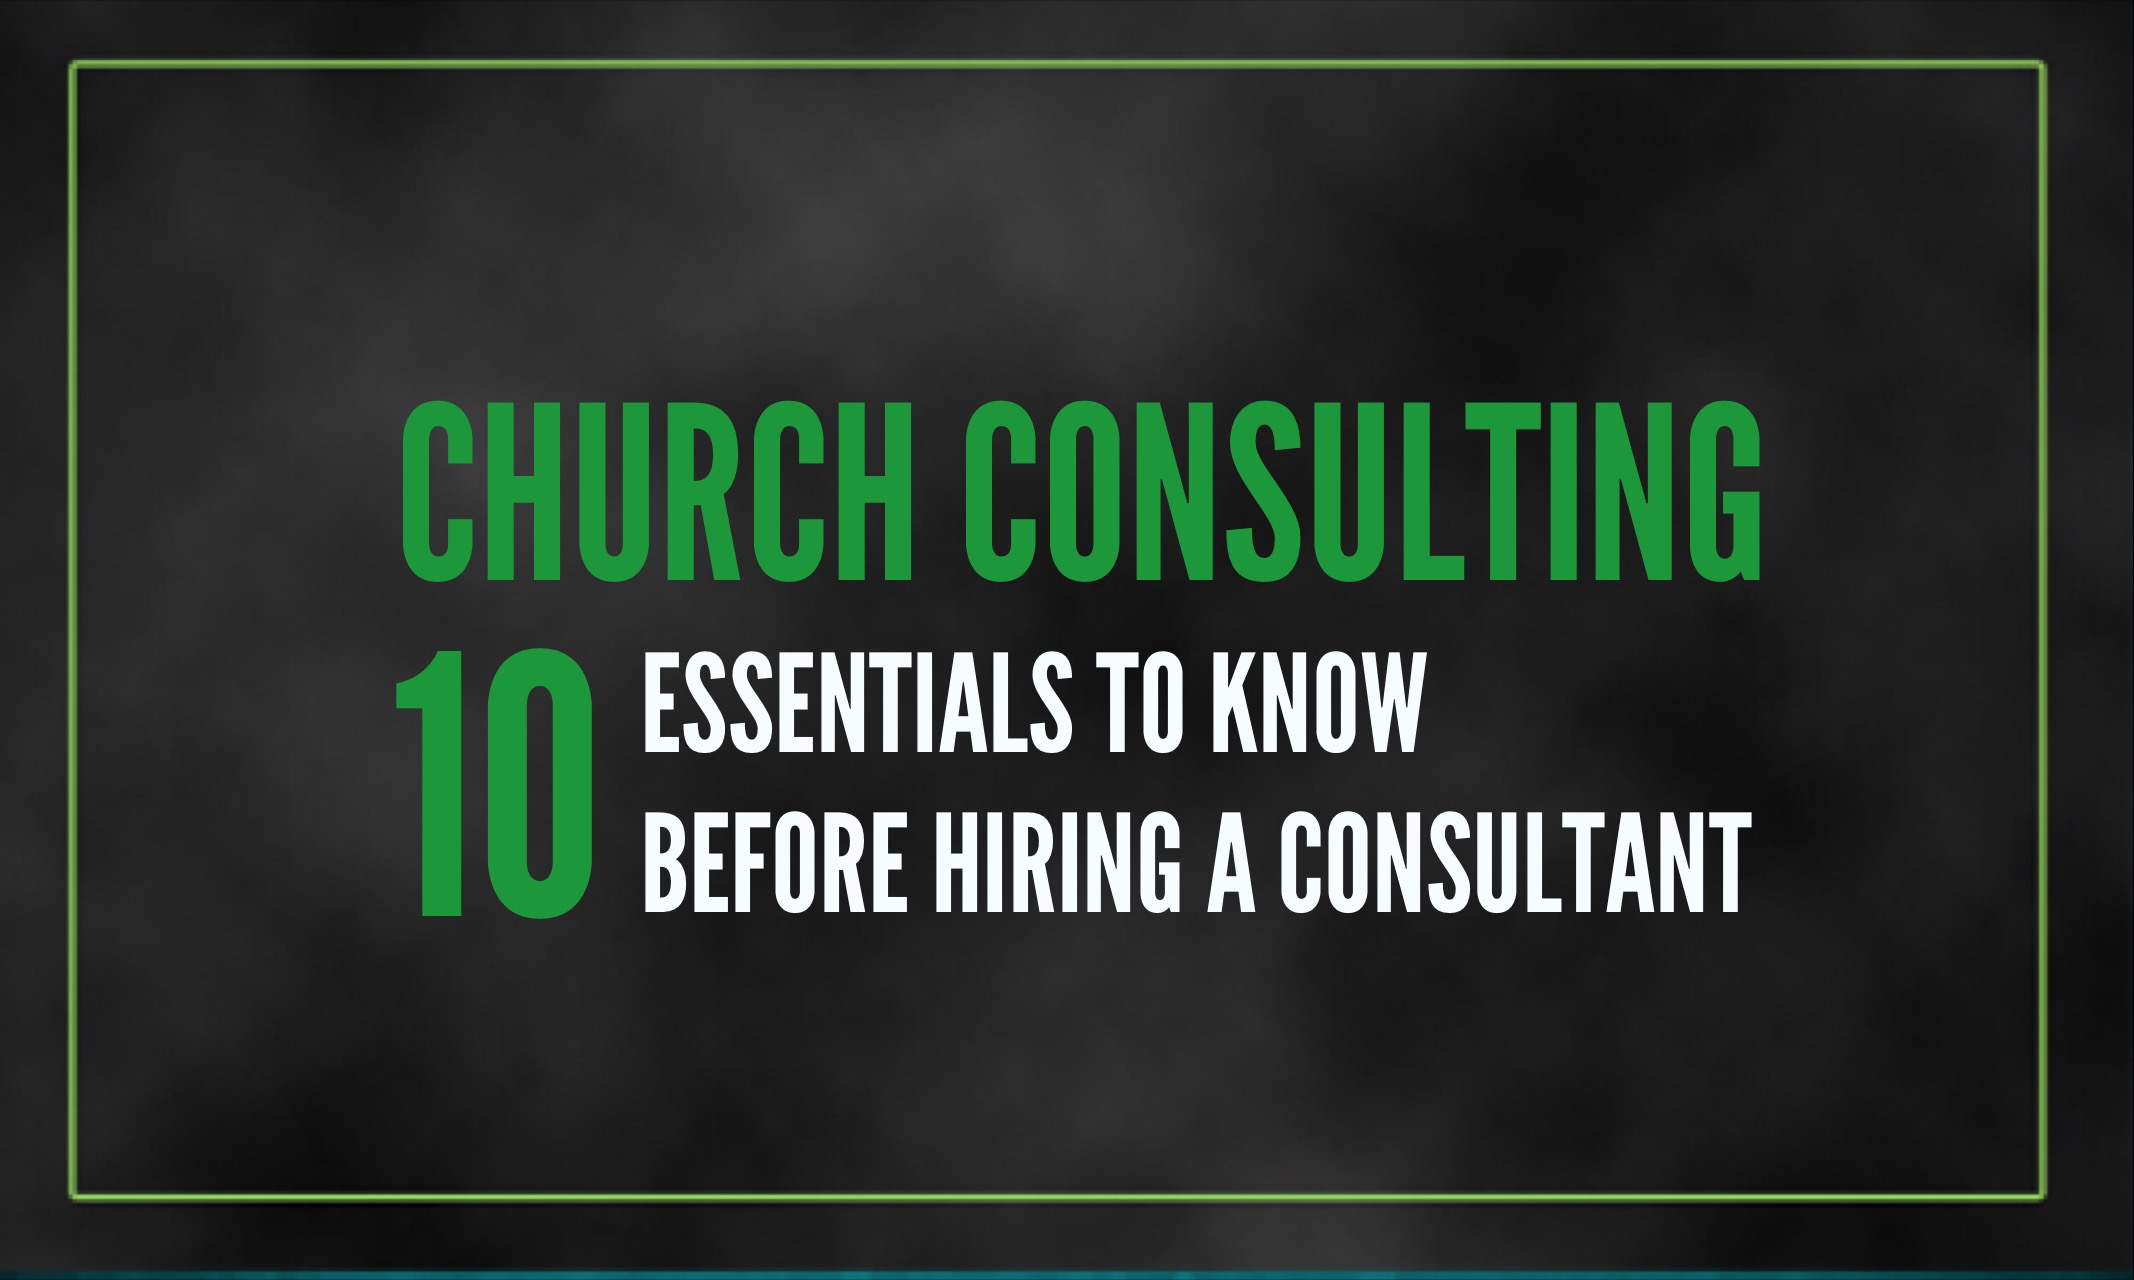 10 Church Consulting Essentials To Know Before Hiring a Consultant